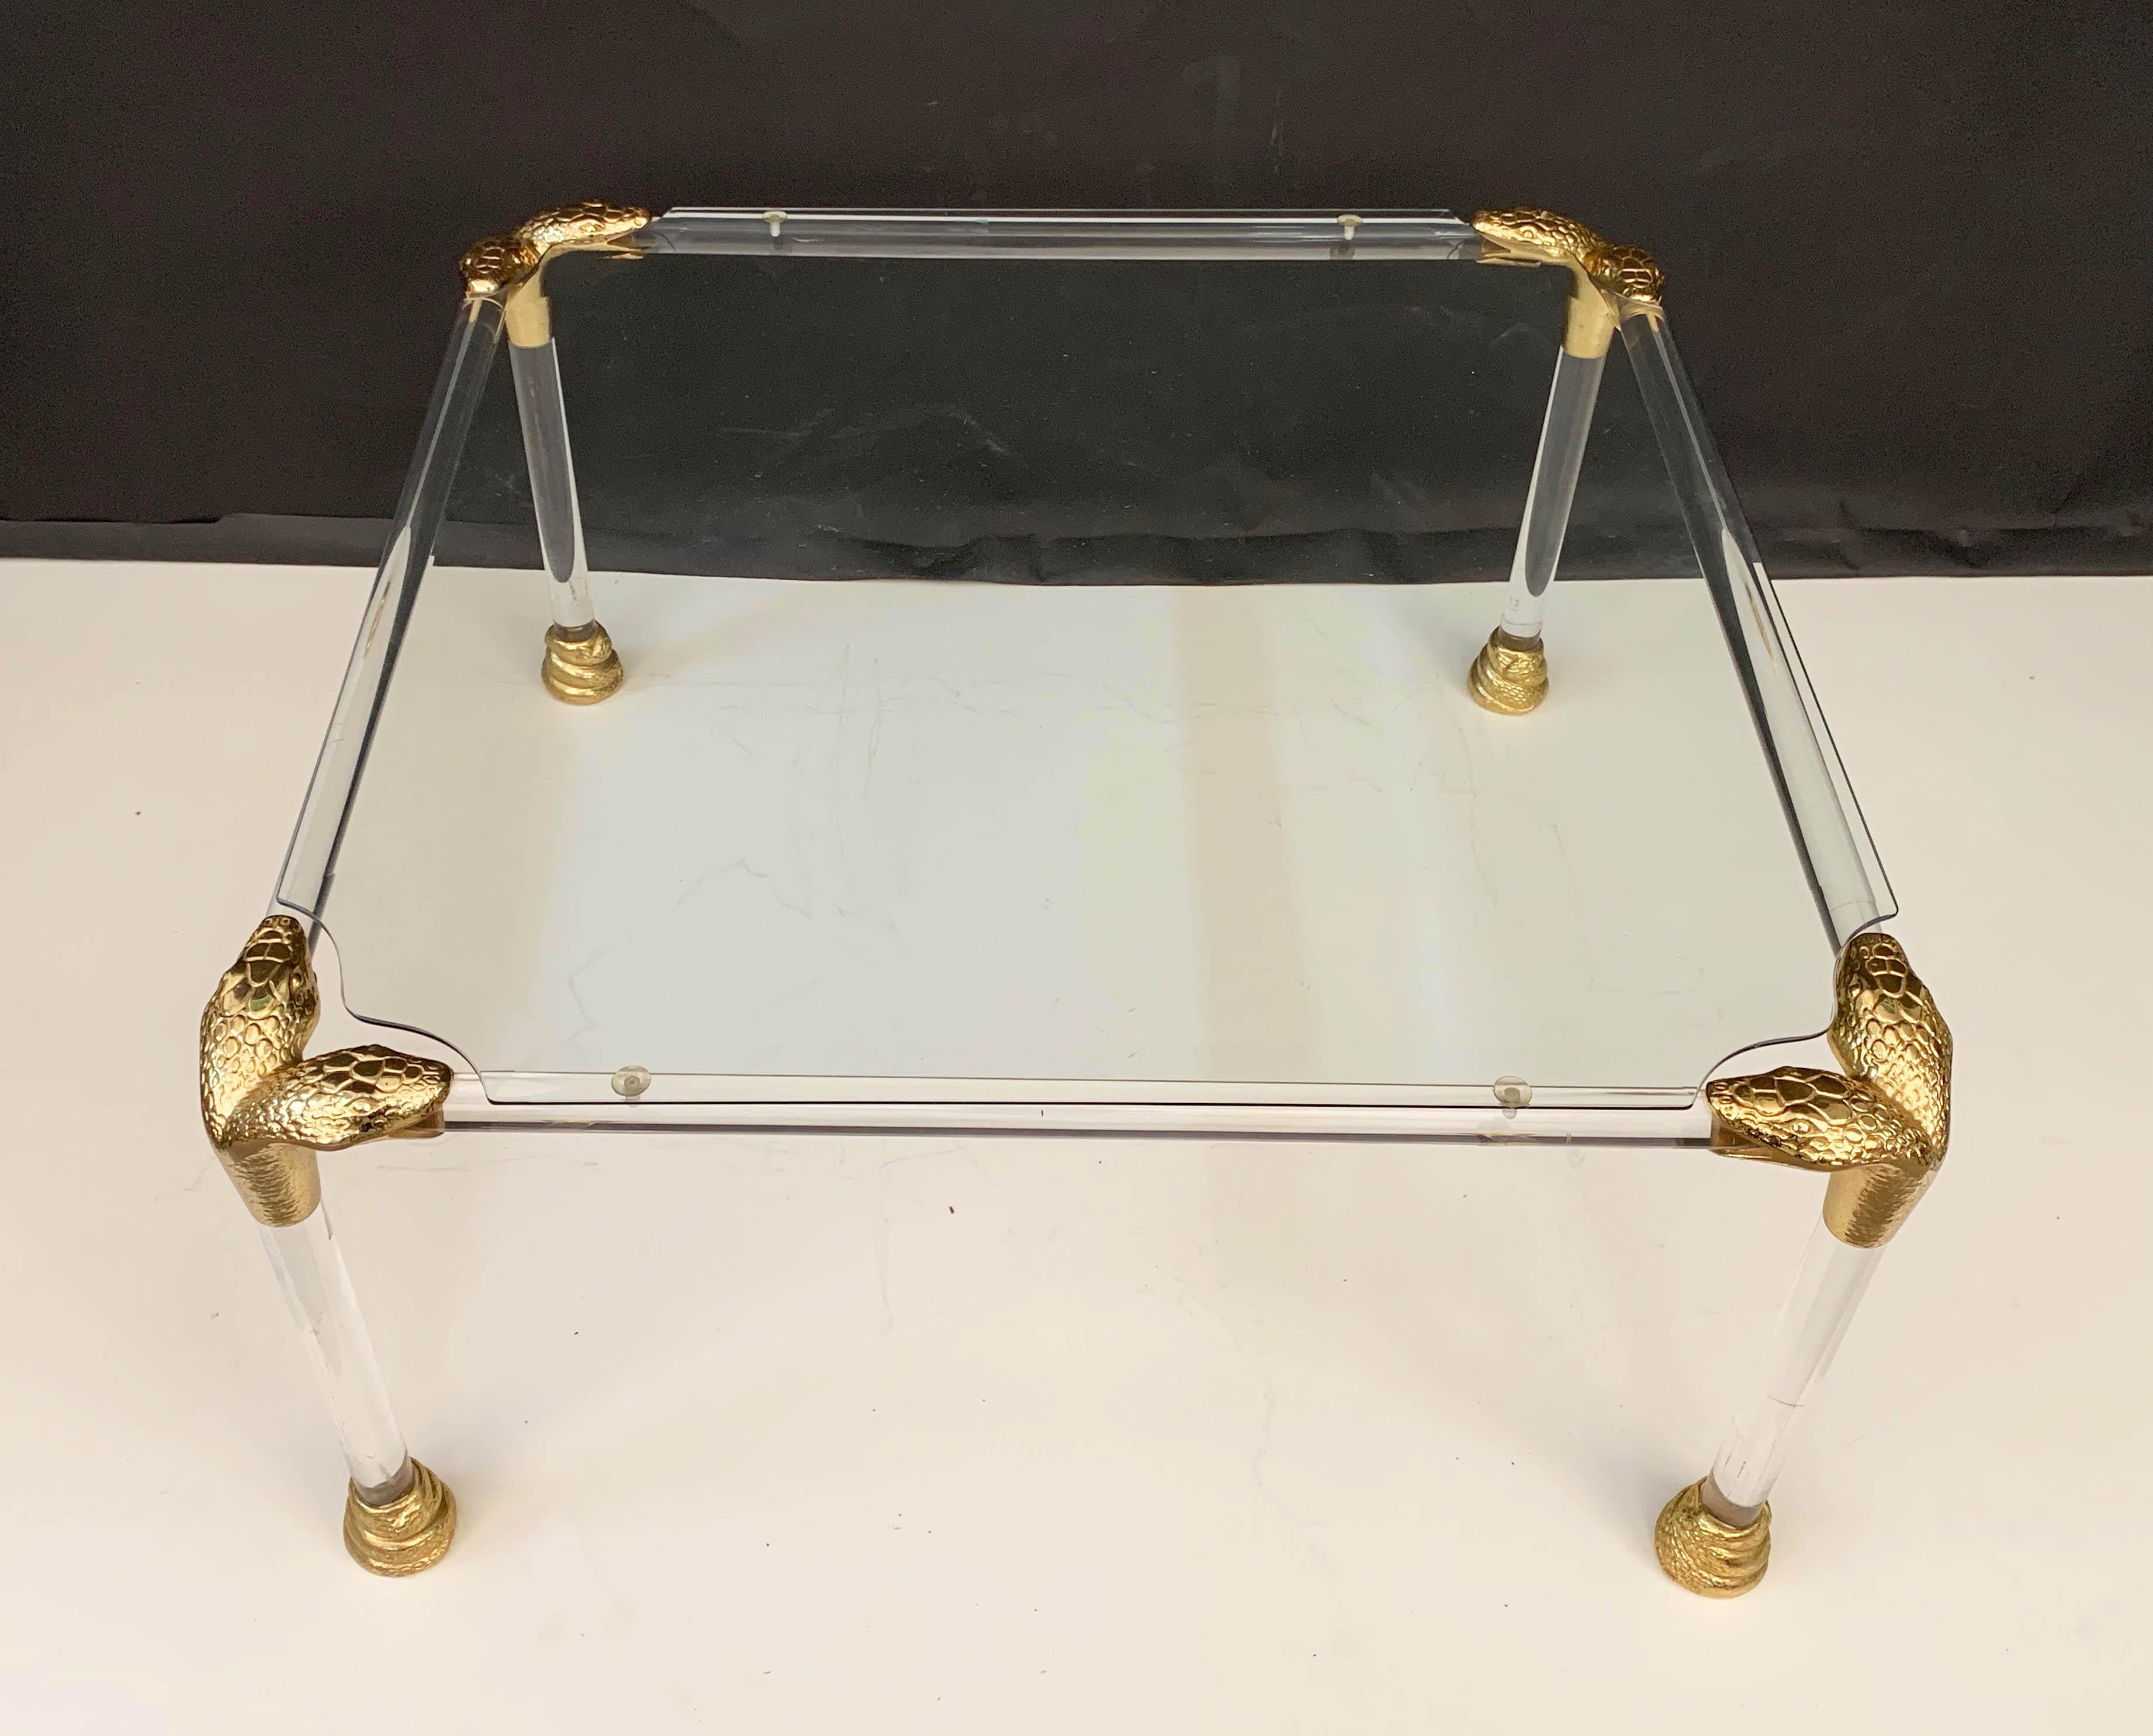 Midcentury Lucite and Brass Italian Coffee Table with Snake Head Details, 1970s For Sale 1